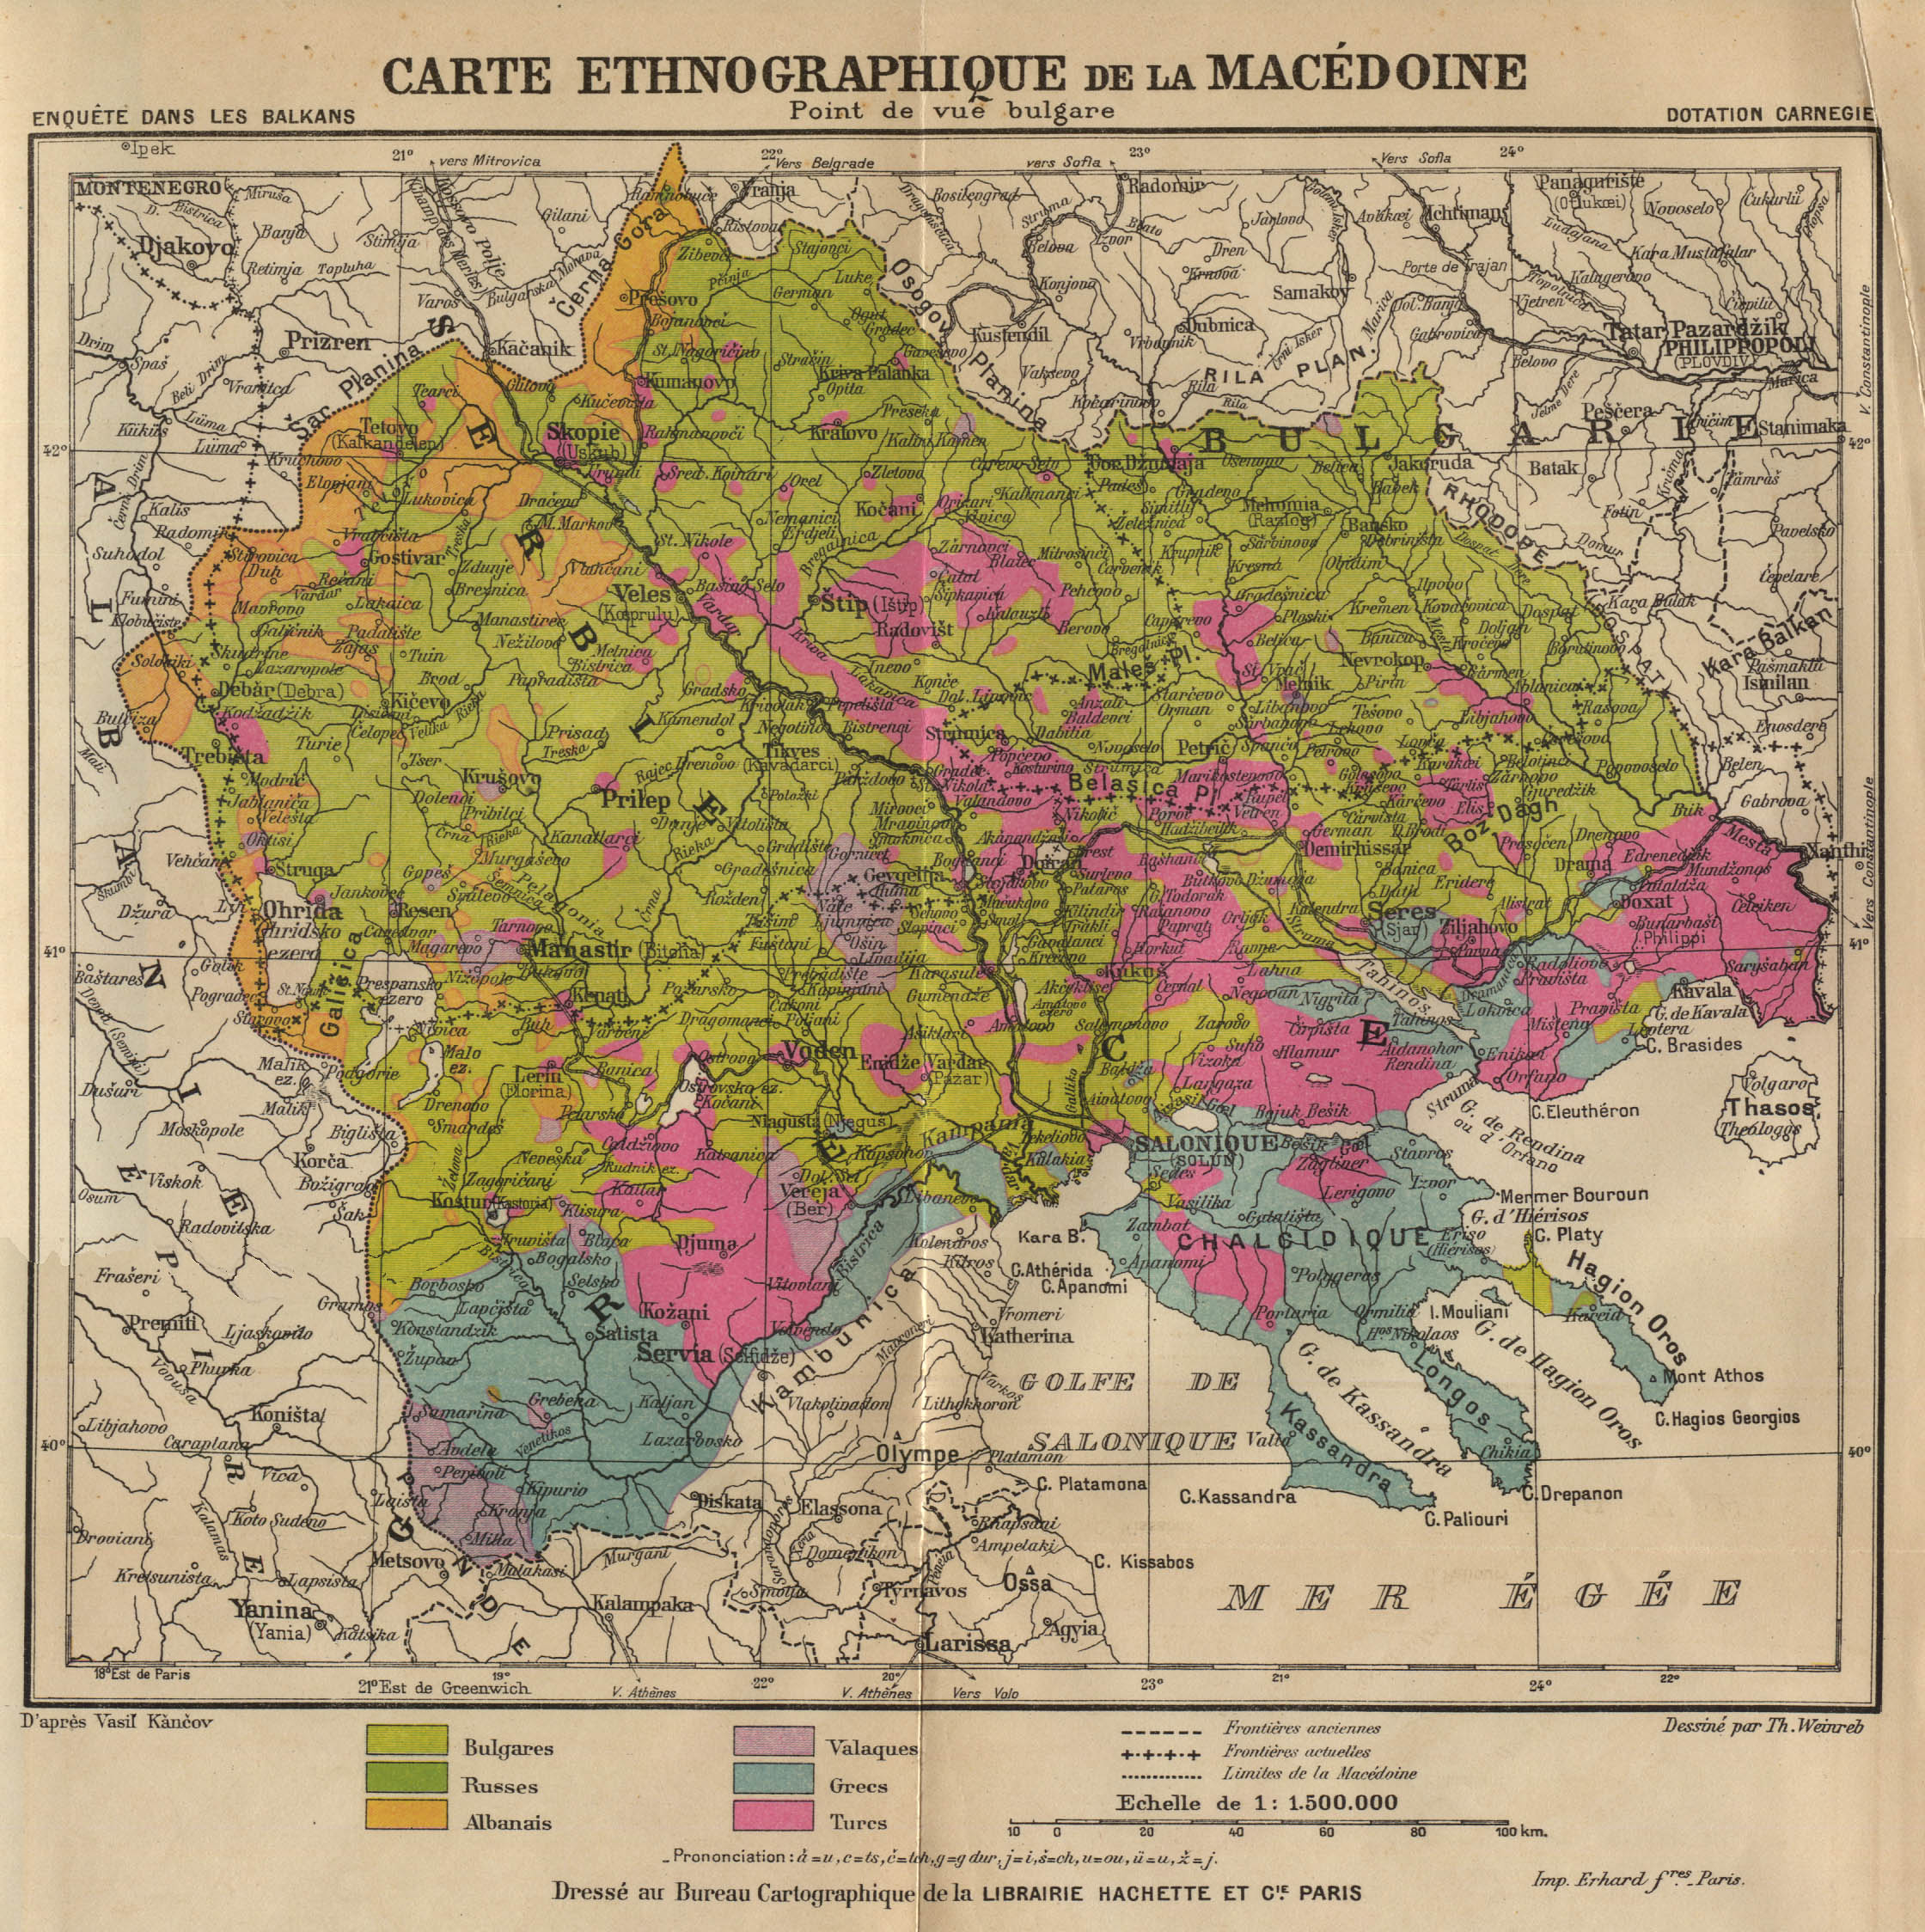 Historical Map of Balkans. Carte Ethnographique de la Macedoine: Point de vue bulgare (998K) [Ethnographic map of Macedonia from the point of view of the Bulgarians]. Map from "Report of the International Commission To Inquire into the Causes and Conduct of the Balkan Wars" 1914. 